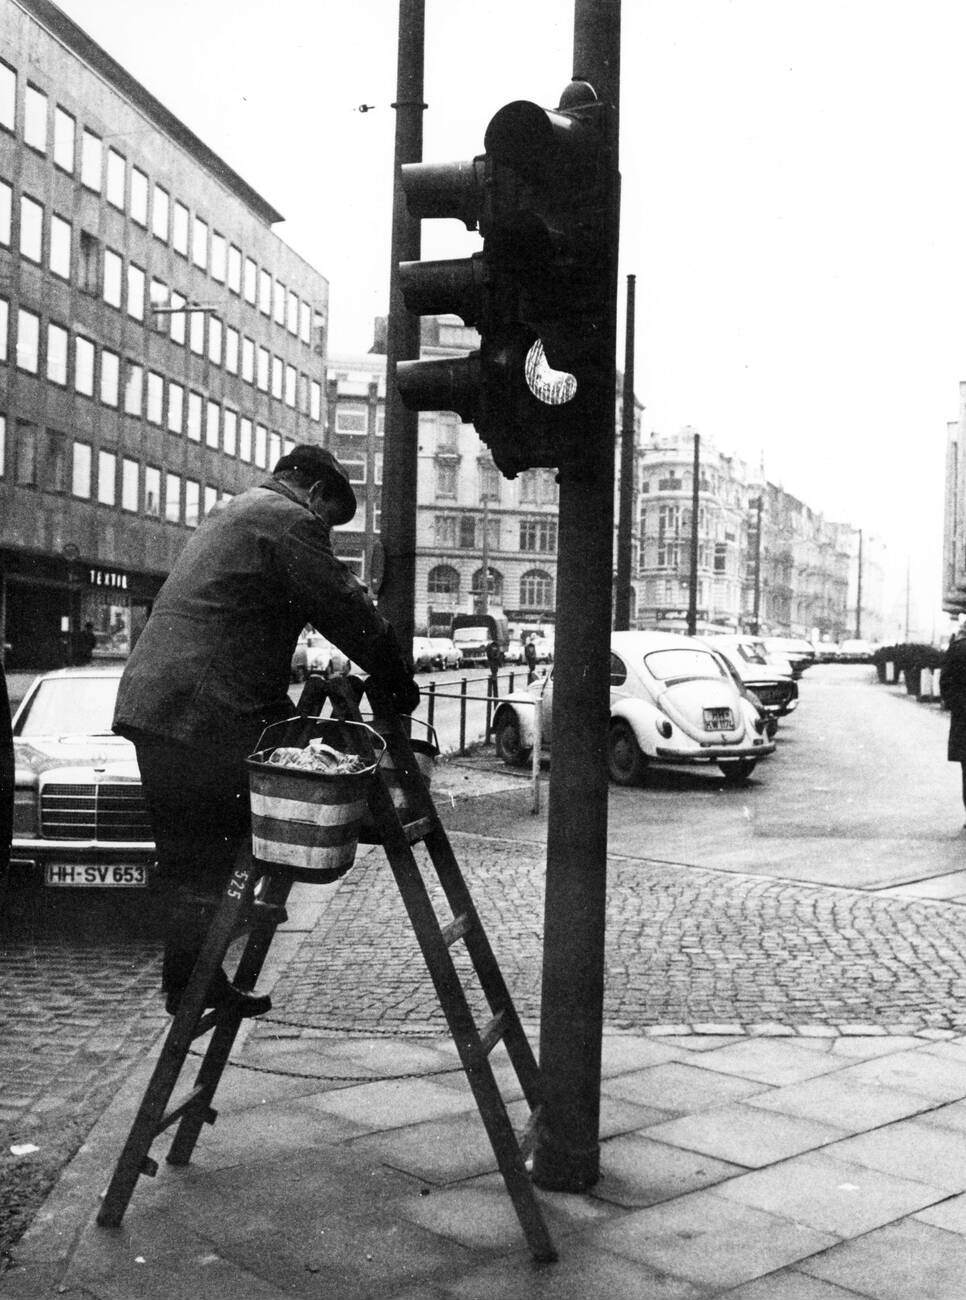 A man cleaning a traffic light in the Kaiser-Wilhelm-Strasse in Hamburg, Germany in 1970.